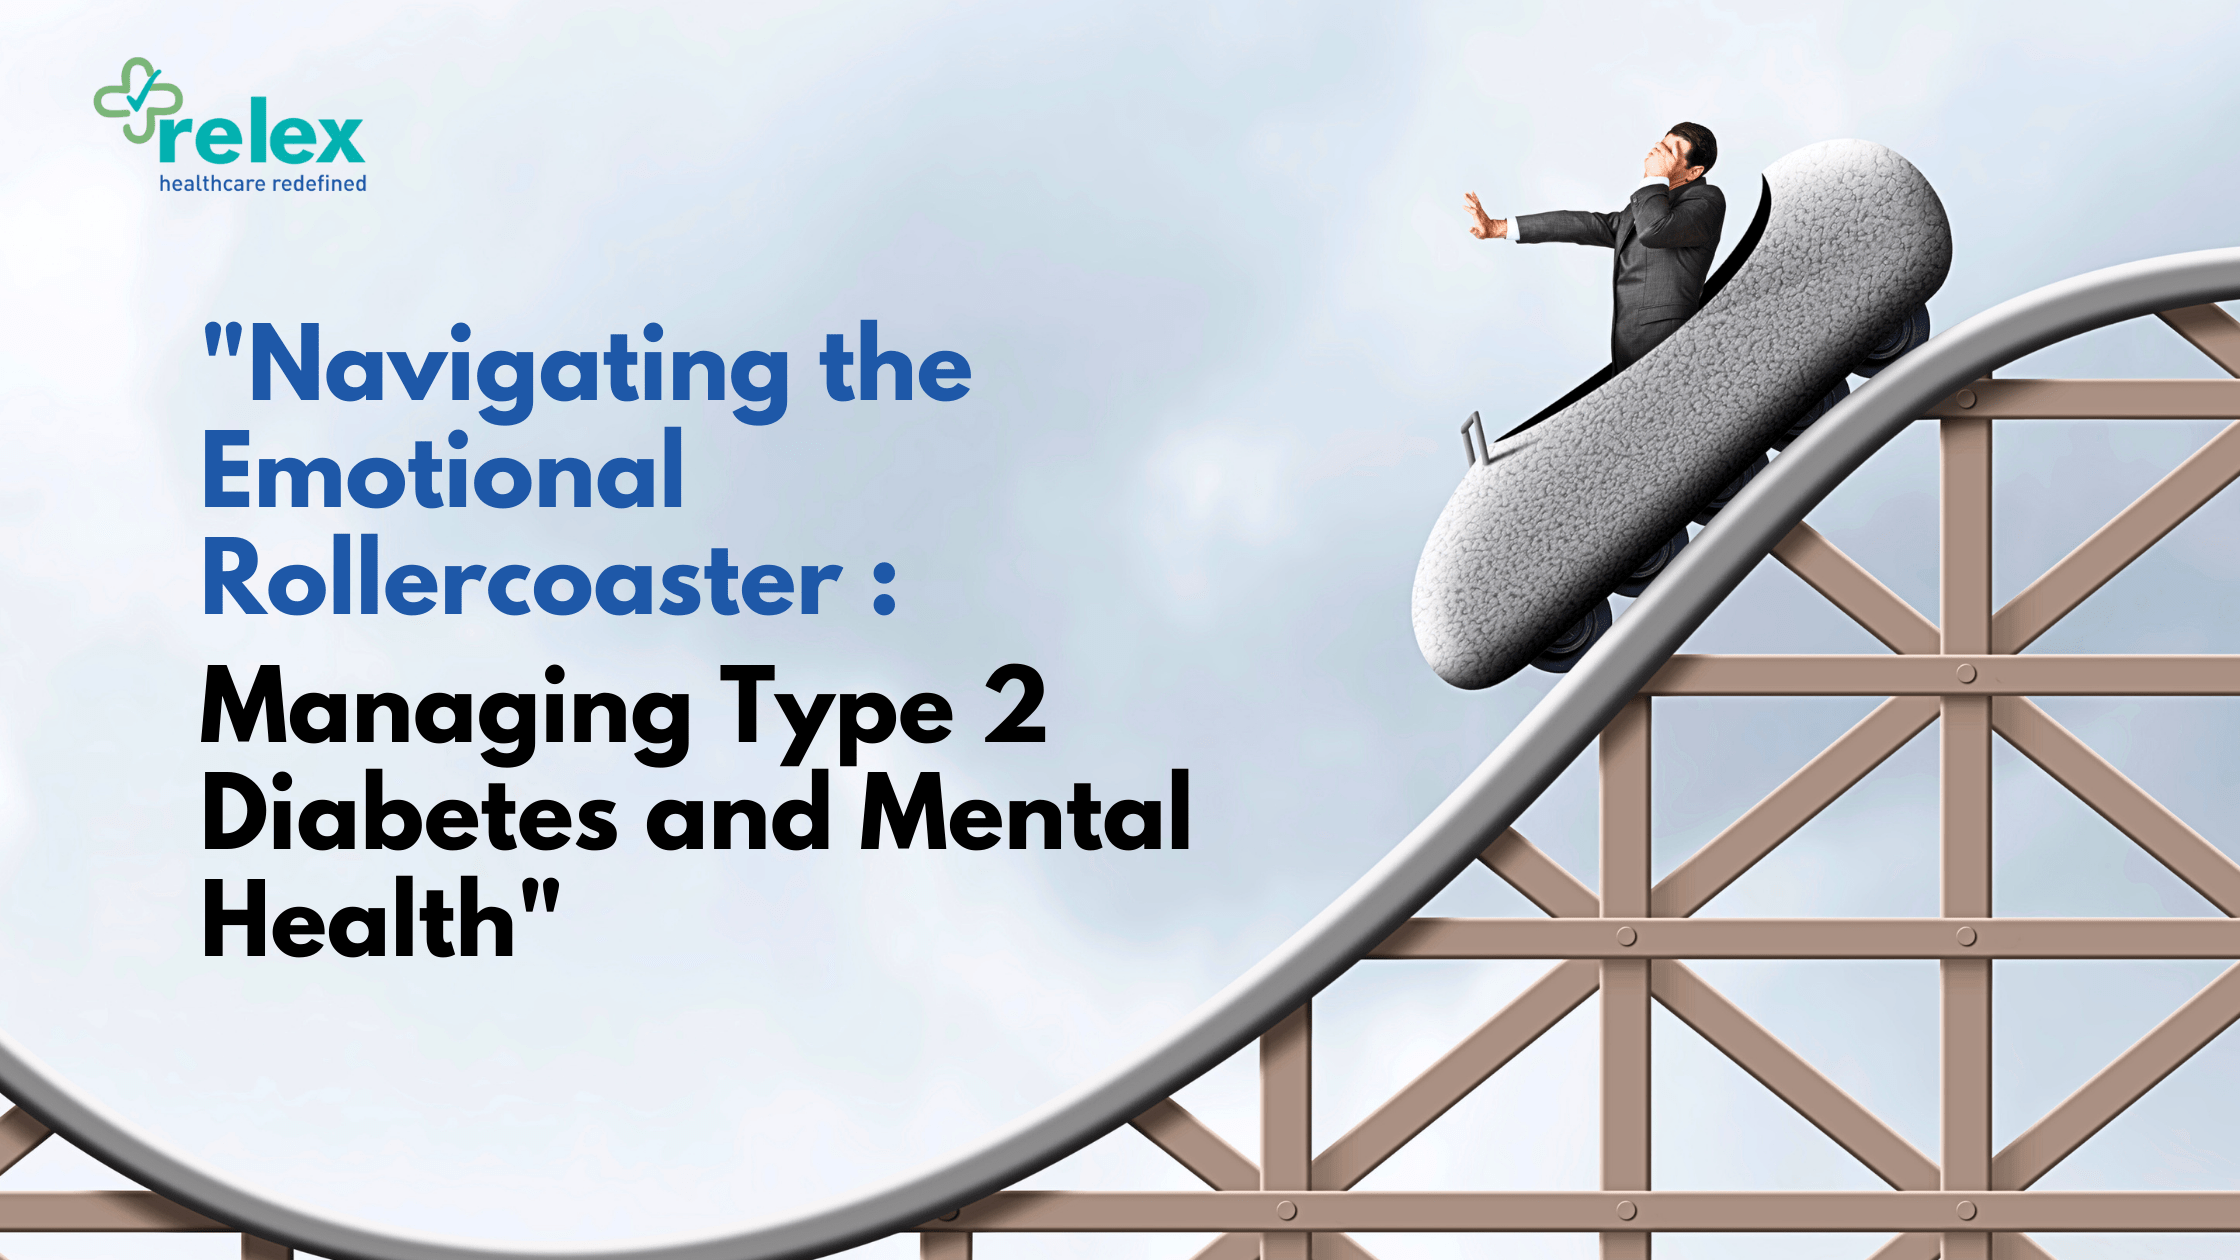 Navigating the Emotional Rollercoaster: Managing Type 2 Diabetes and Mental Health